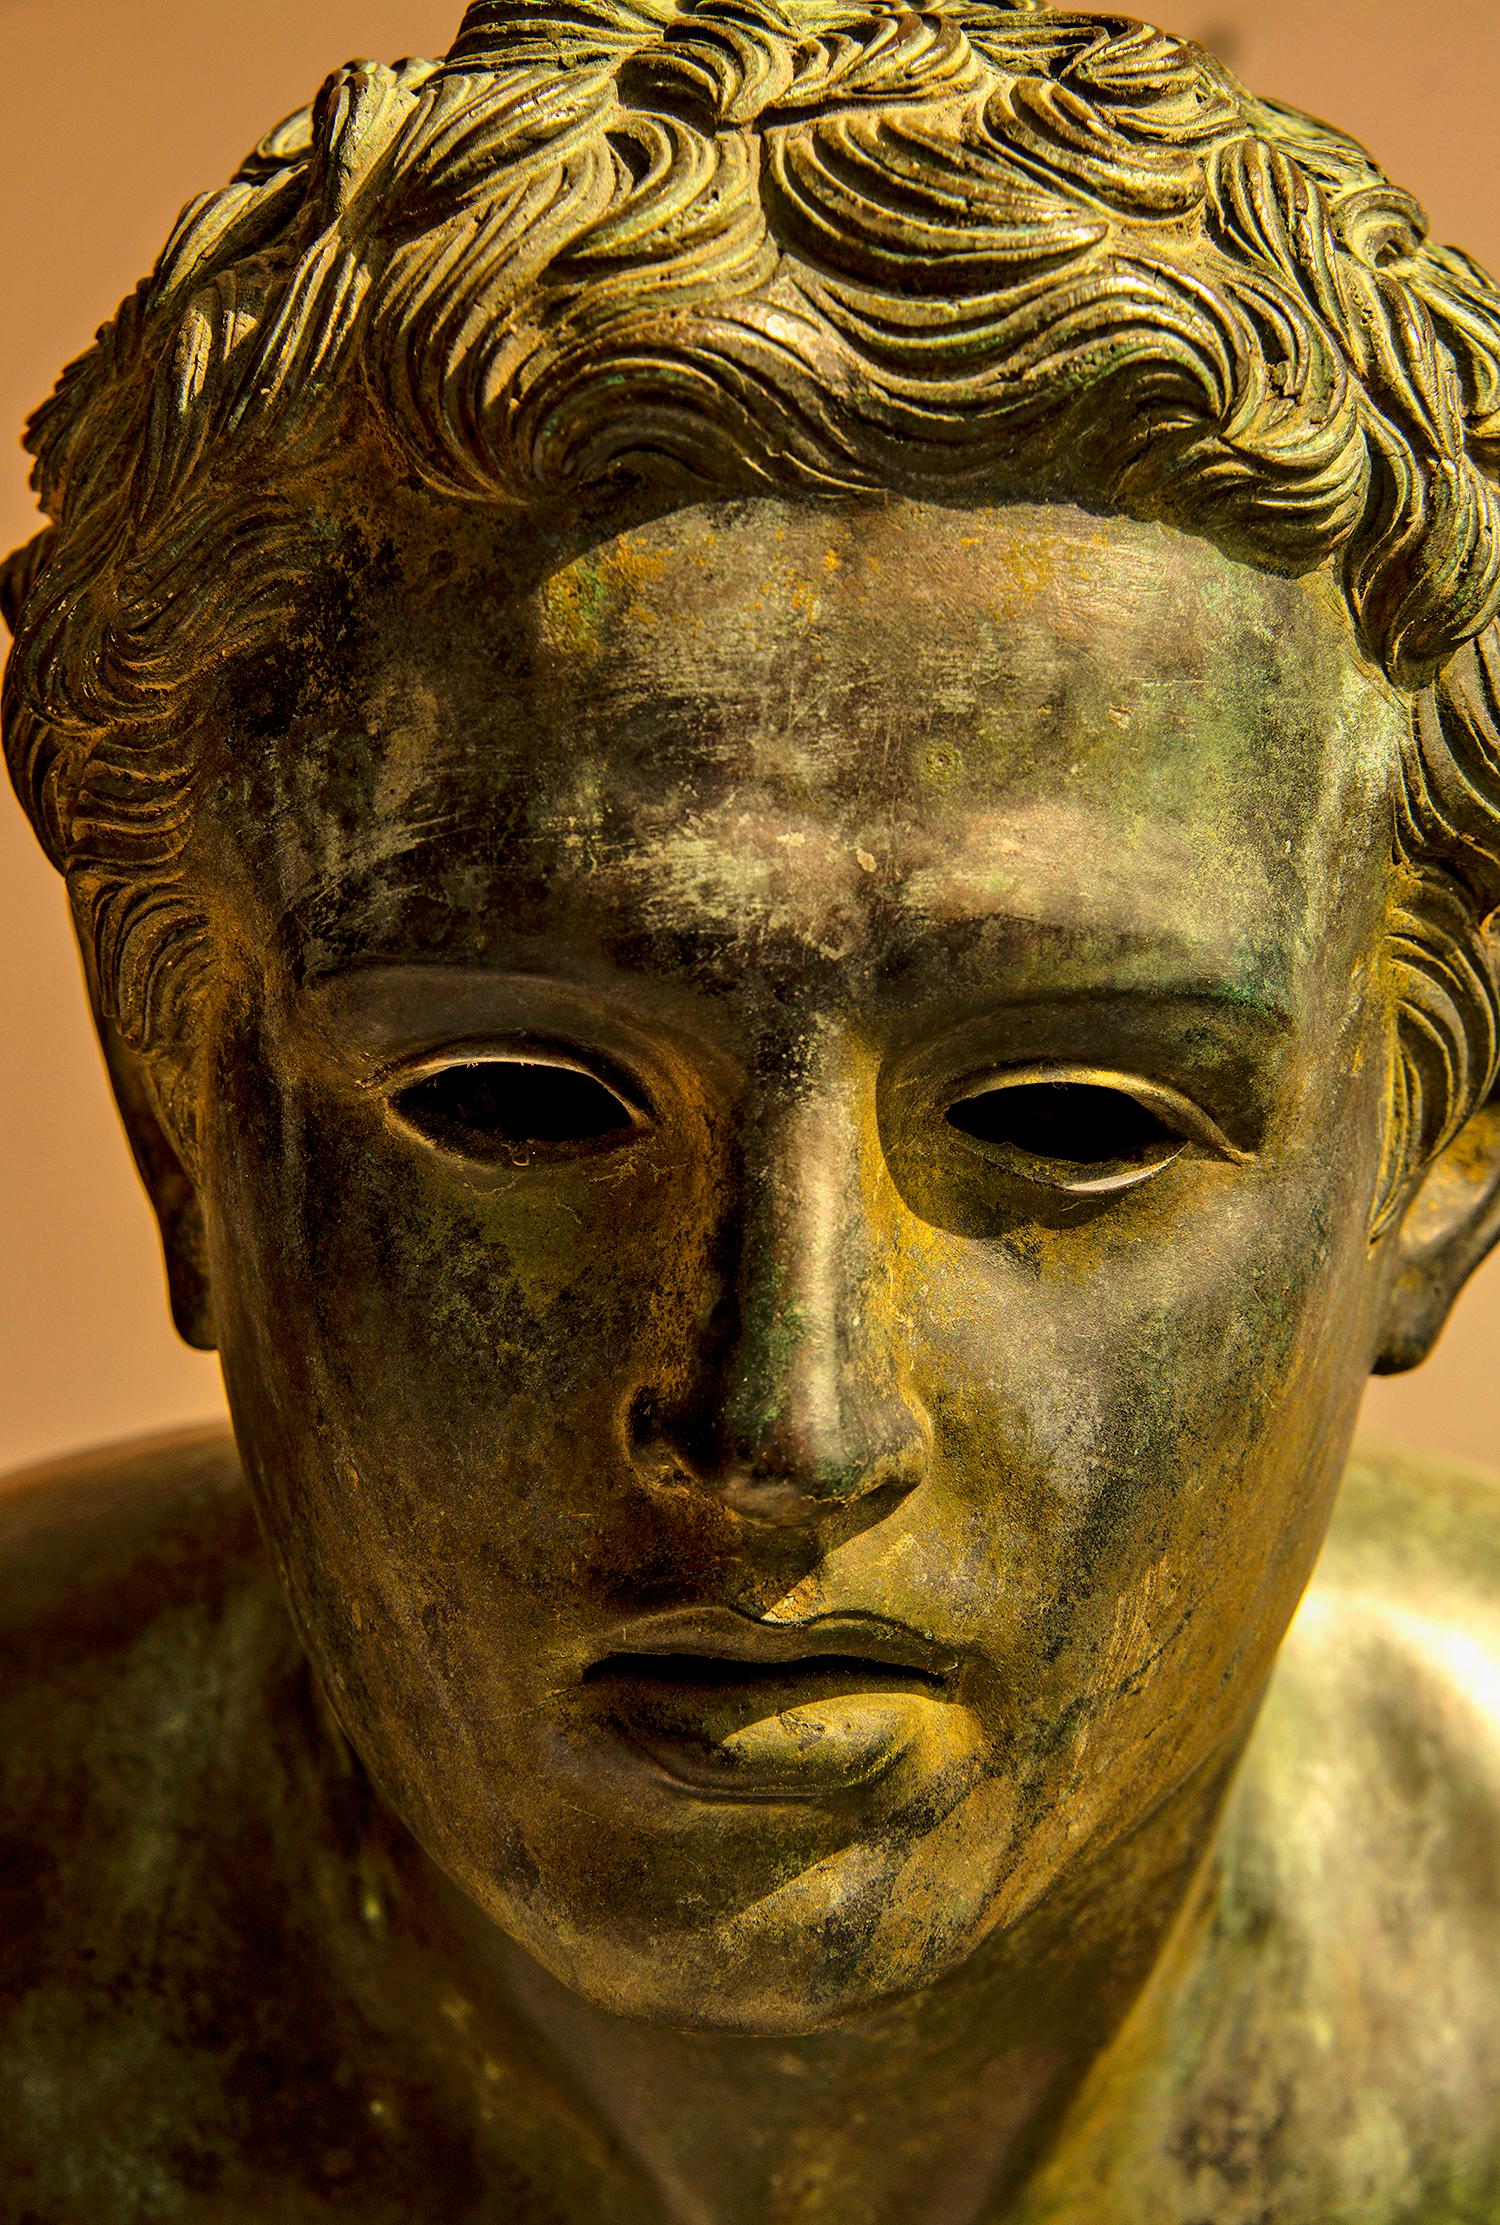 Robert Funk Color Photograph - Classical Roman Bronze Head in thought 